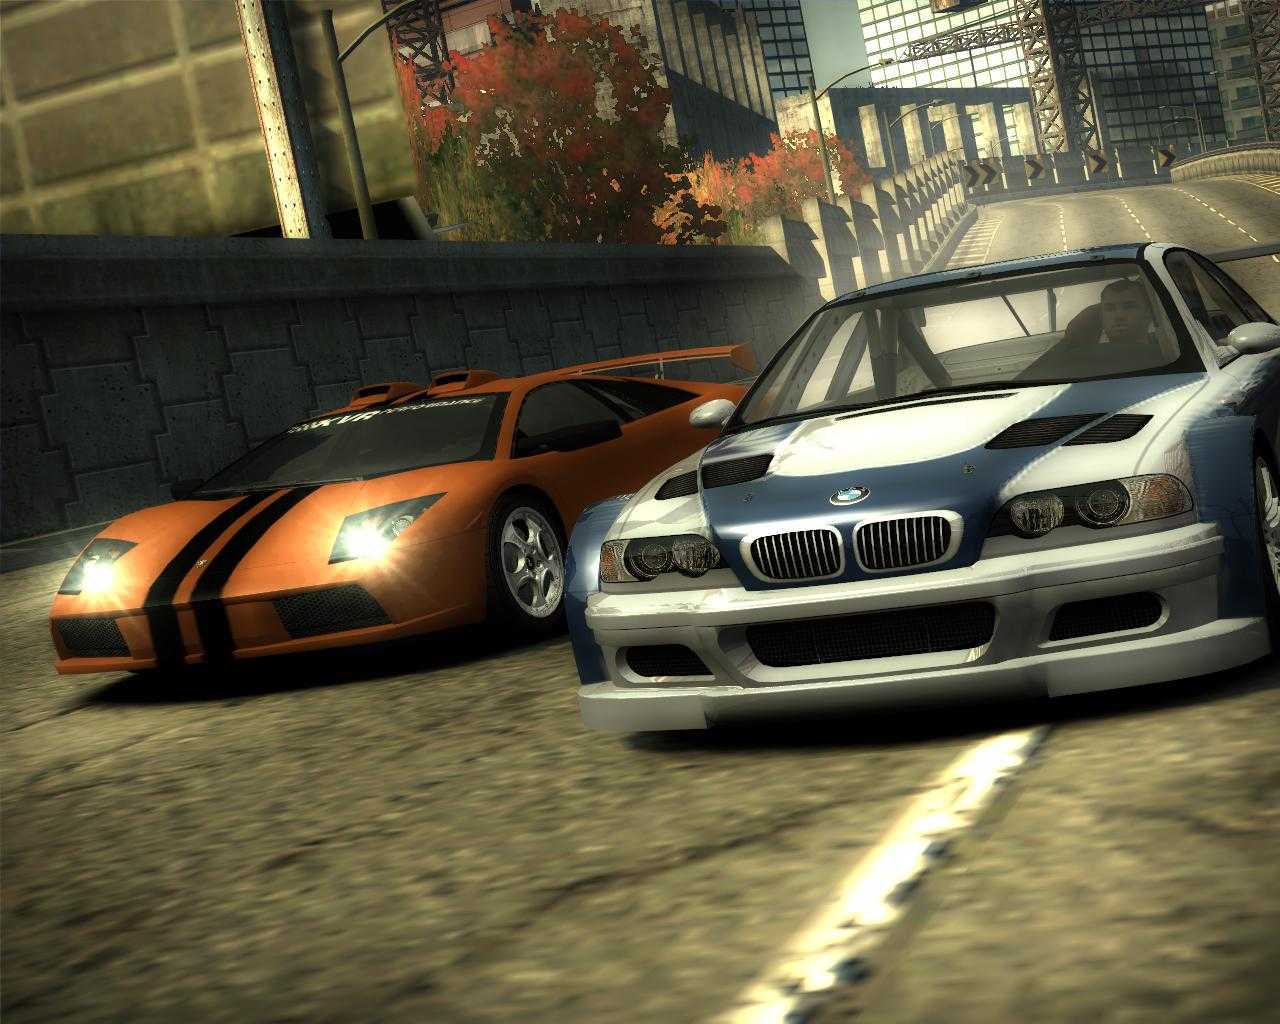 Nfs mw cars. Нид фор СПИД most wanted 2005. Нфс мост вантед 2005. Гонки NFS most wanted. Need for Speed MW 2005.